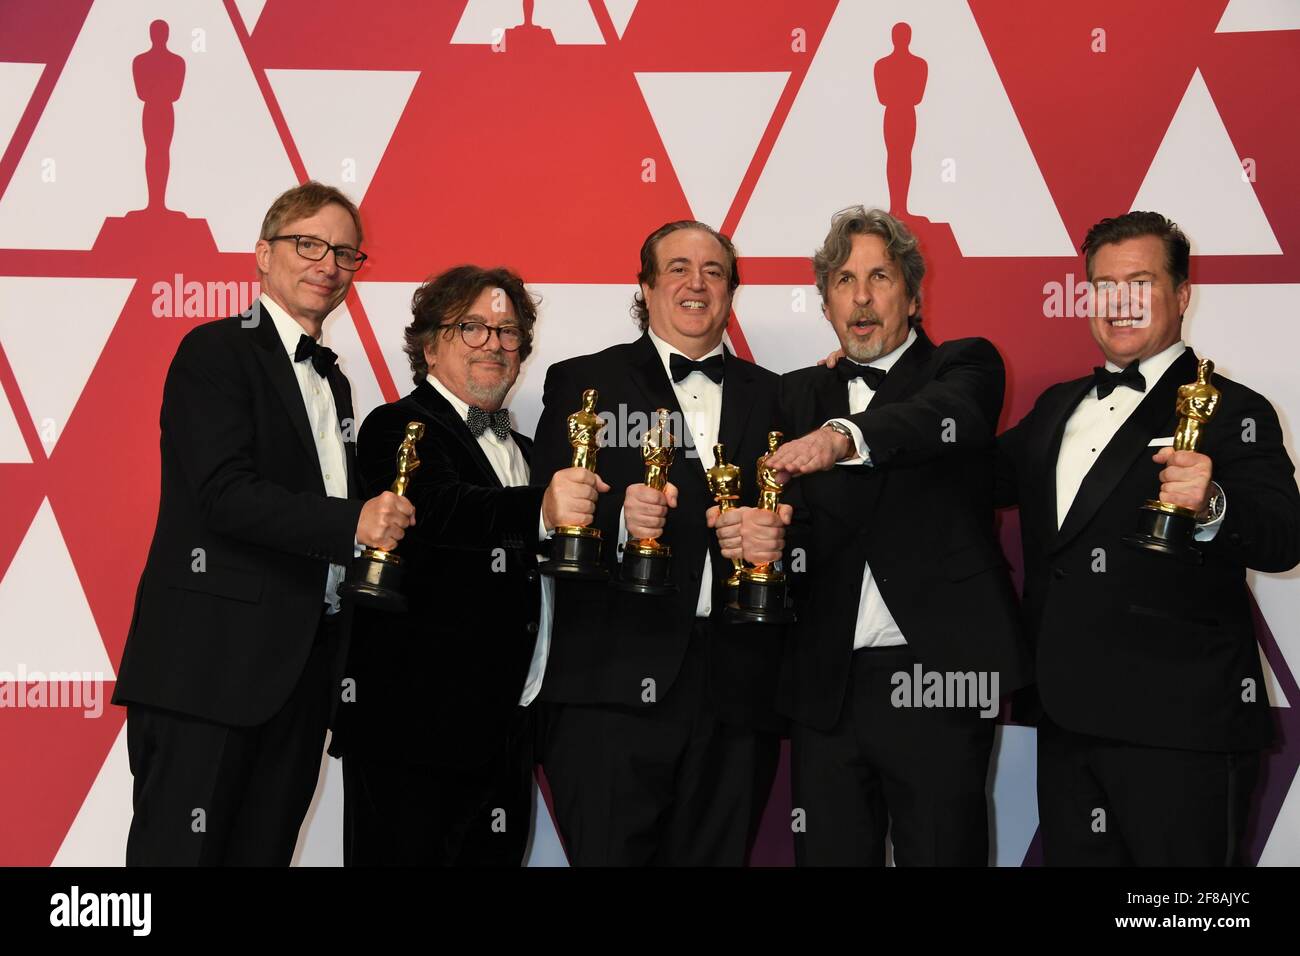 Winner Best Picture Green Book  Winner Best Picture Green Book Jim Burke Charles B. Wessler, Brian Currie, Peter Farrelly, Nick Vallelonga in the Press Room during the 91st Annual Academy Awards, Oscars, held at the Dolby Theater in Hollywood, California, Sunday, February 24, 2019 Photo by Jennifer Graylock-Graylock.com 917-519-7666 Stock Photo